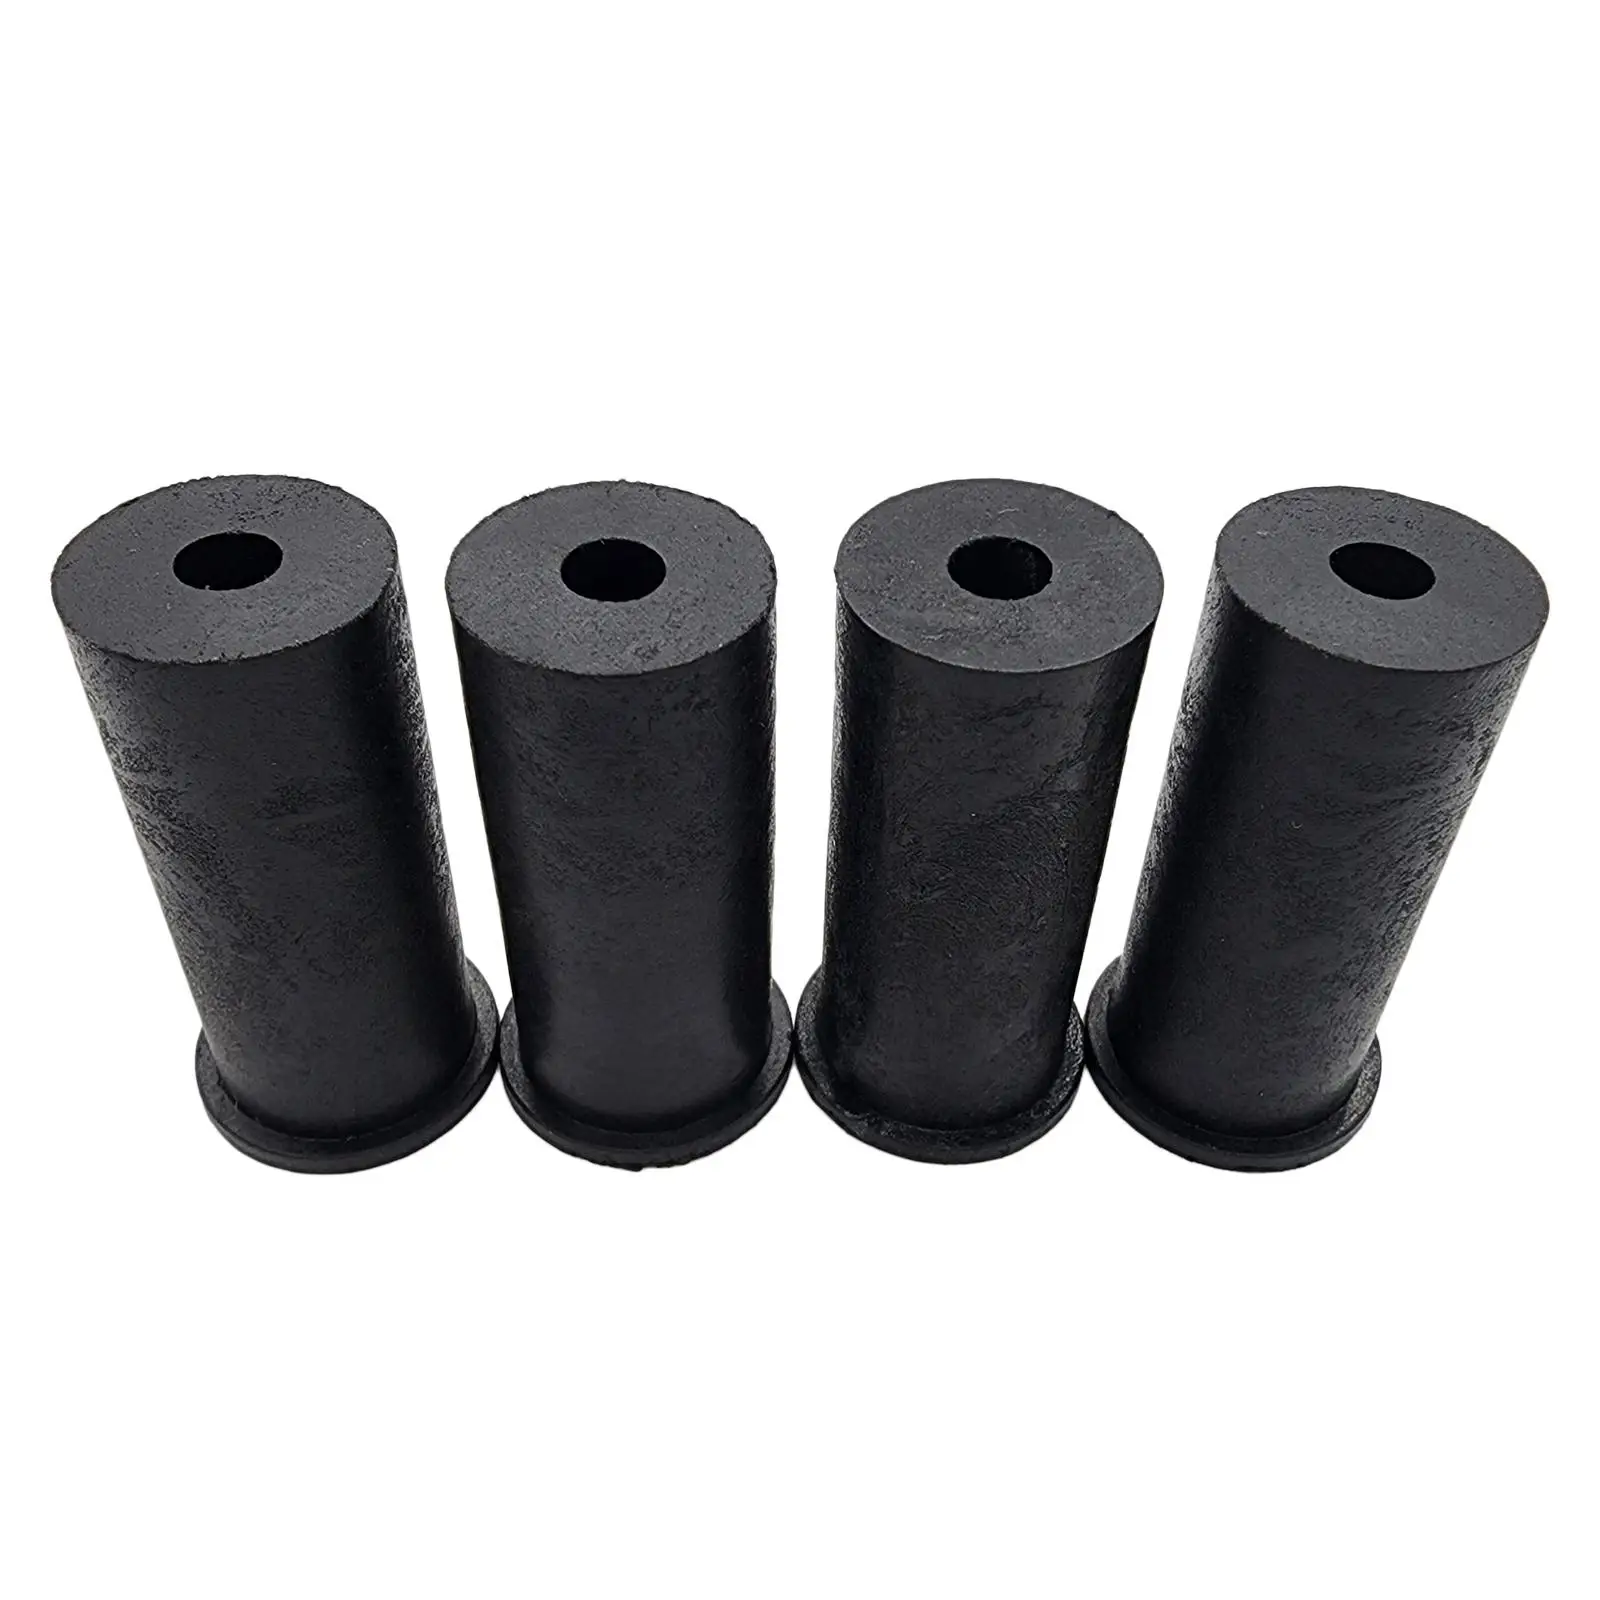 4Pcs Metal Door Bushings Replacement Spare Parts Easy Installation Accessory